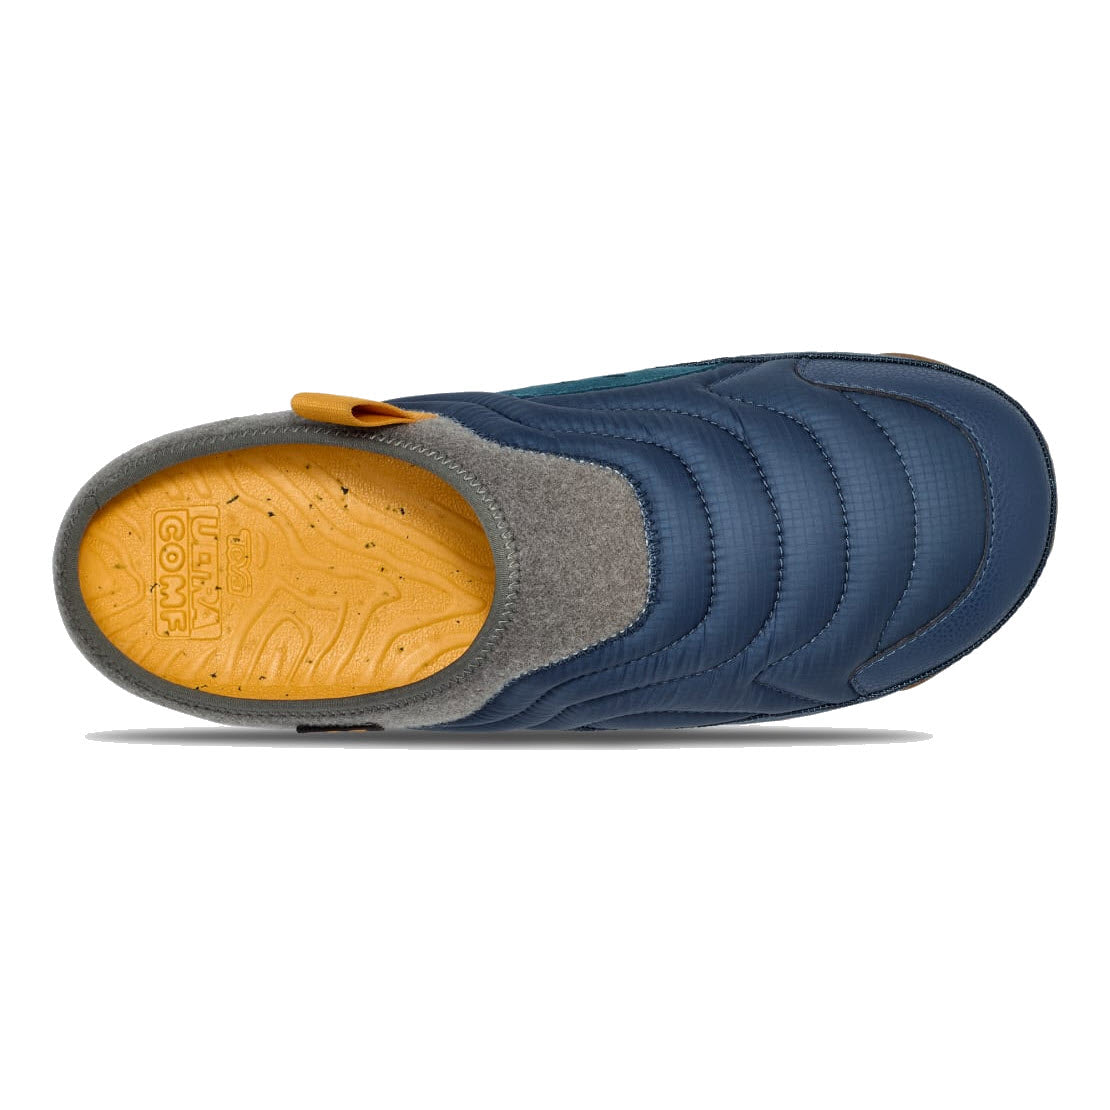 Side view of a Teva Reember Terrain Slip On Blue Wing Teal - Mens with a rubber sole and a pull tab on the heel.